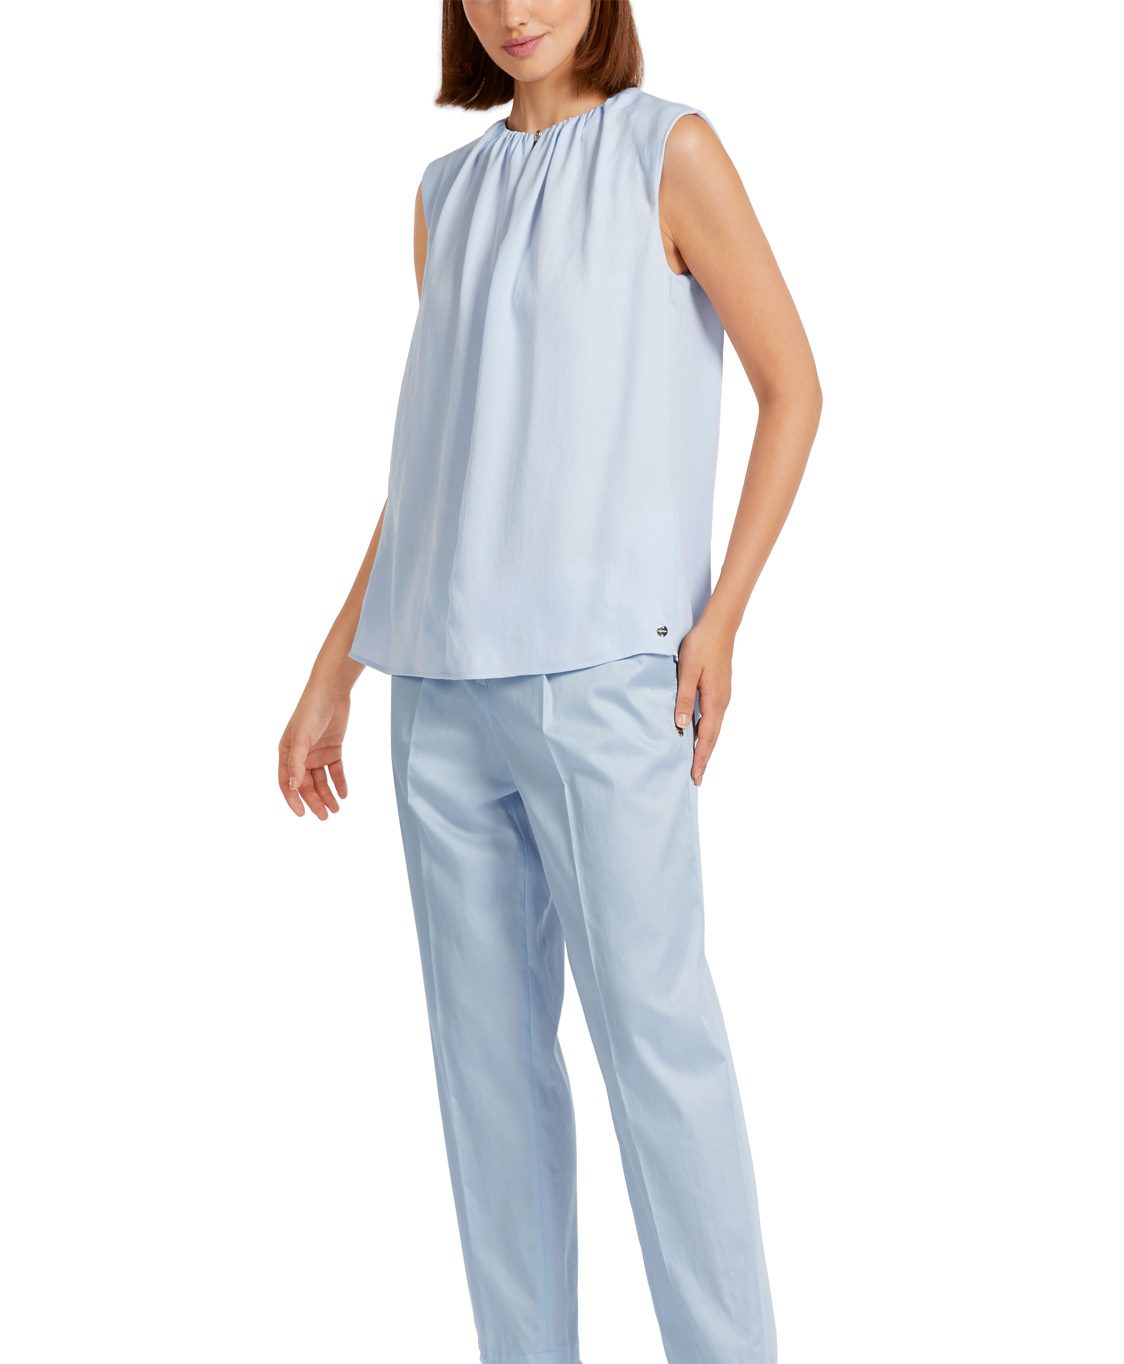 Marccain Collectie Top Uc 61.03 W39 Blauw